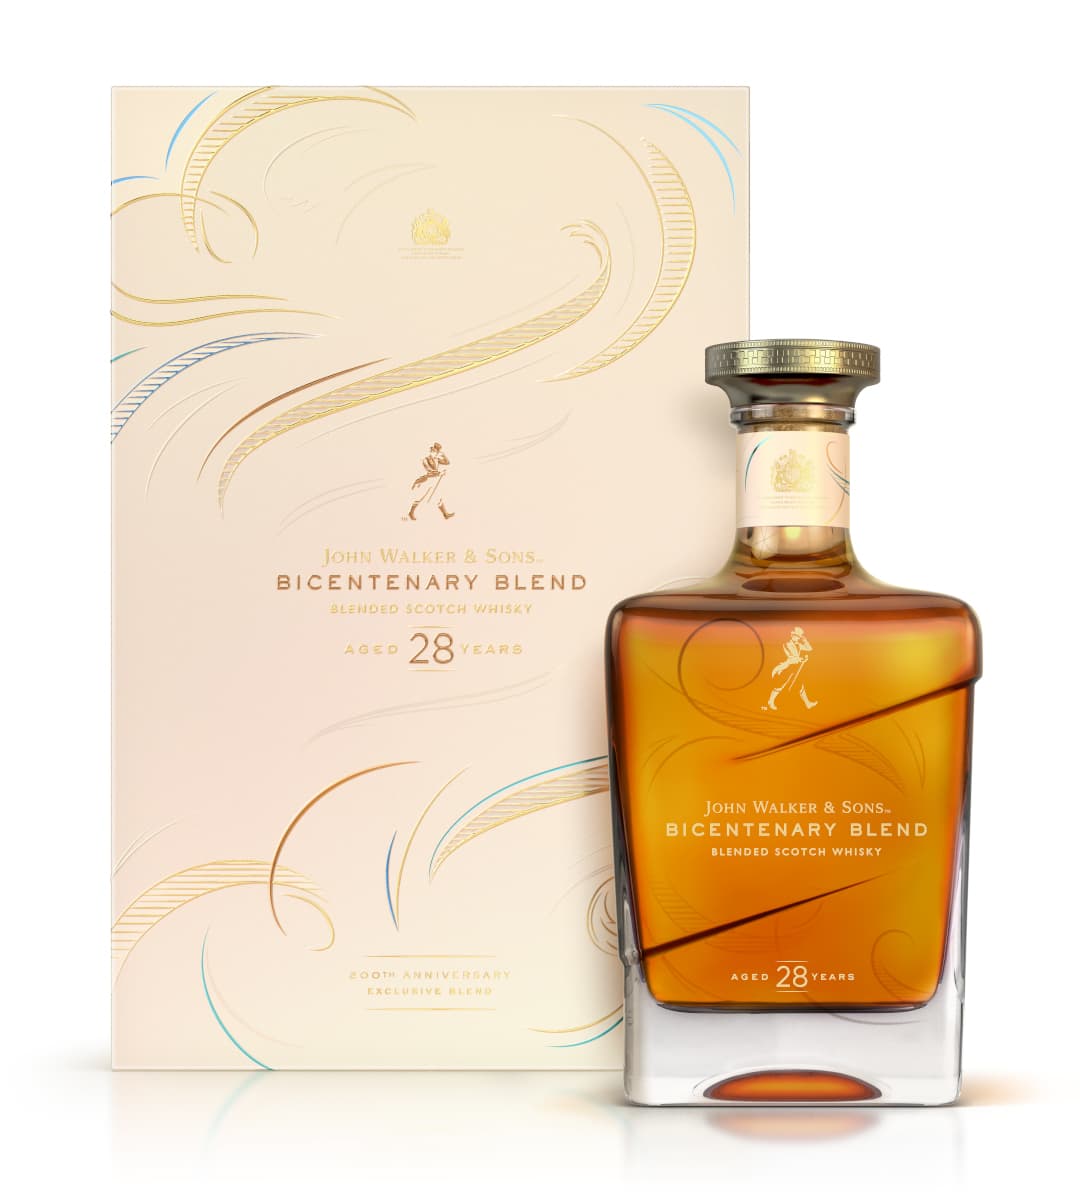 John Walker & Sons Bicentenary Blend 28 Year Old Blended Scotch Whisky Bottle and Box